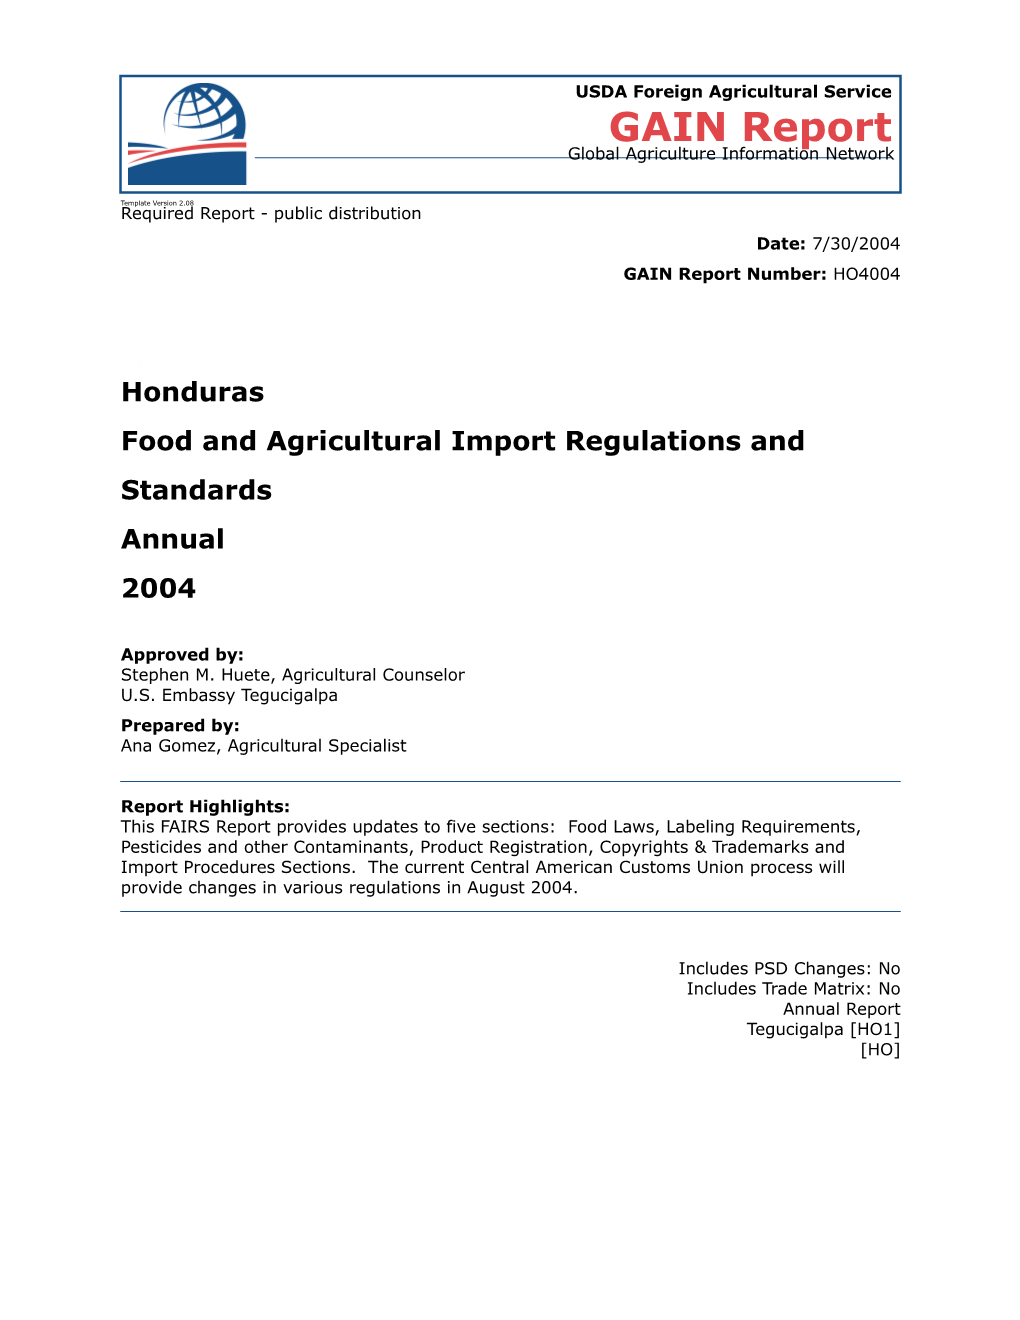 Food and Agricultural Import Regulations And